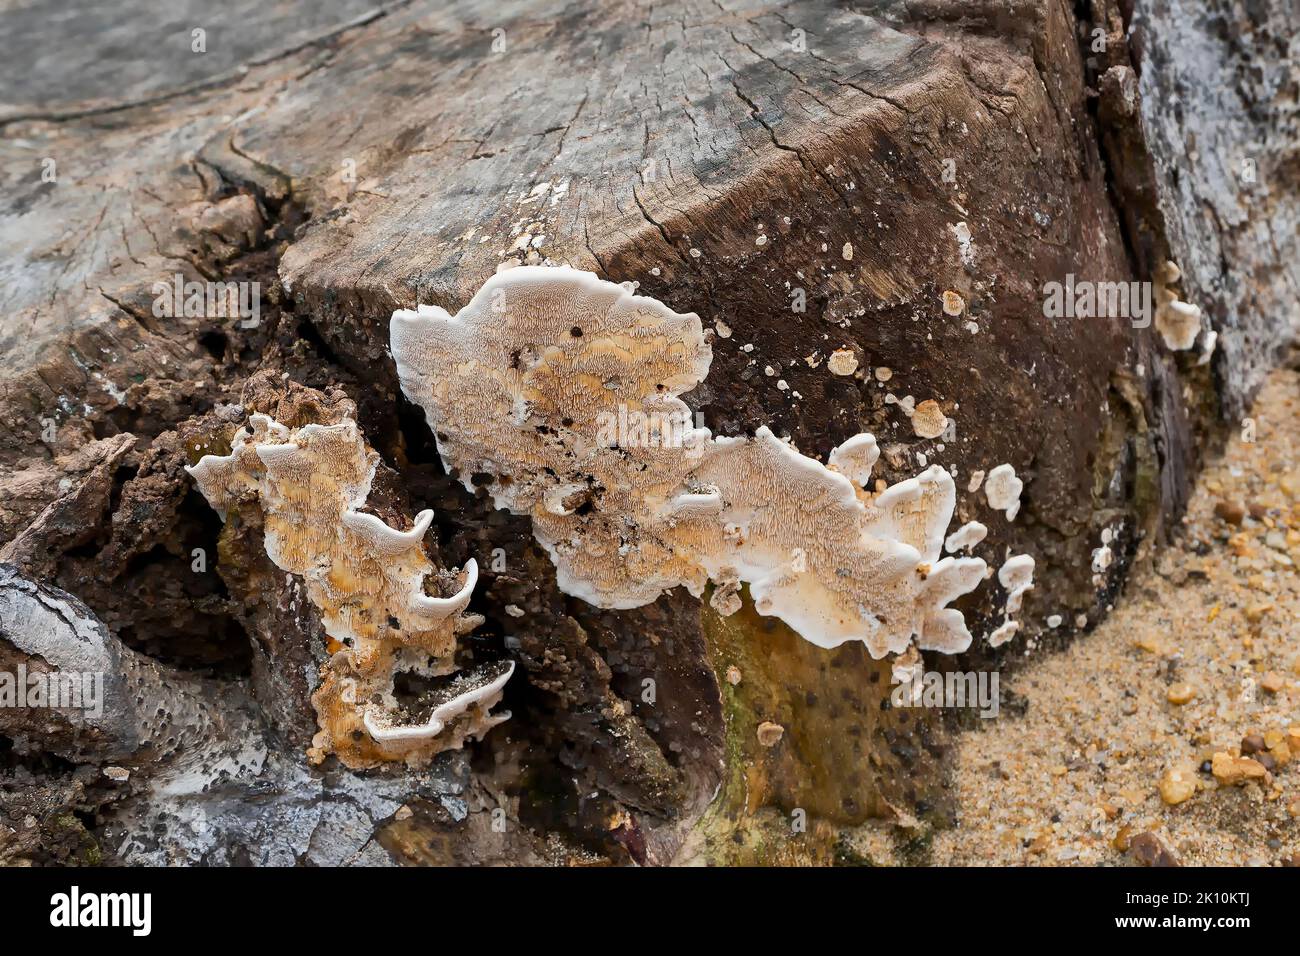 Polyporous fungus, a common fungus on old tree trunk. Howrah, West Bengal, India. Stock Photo